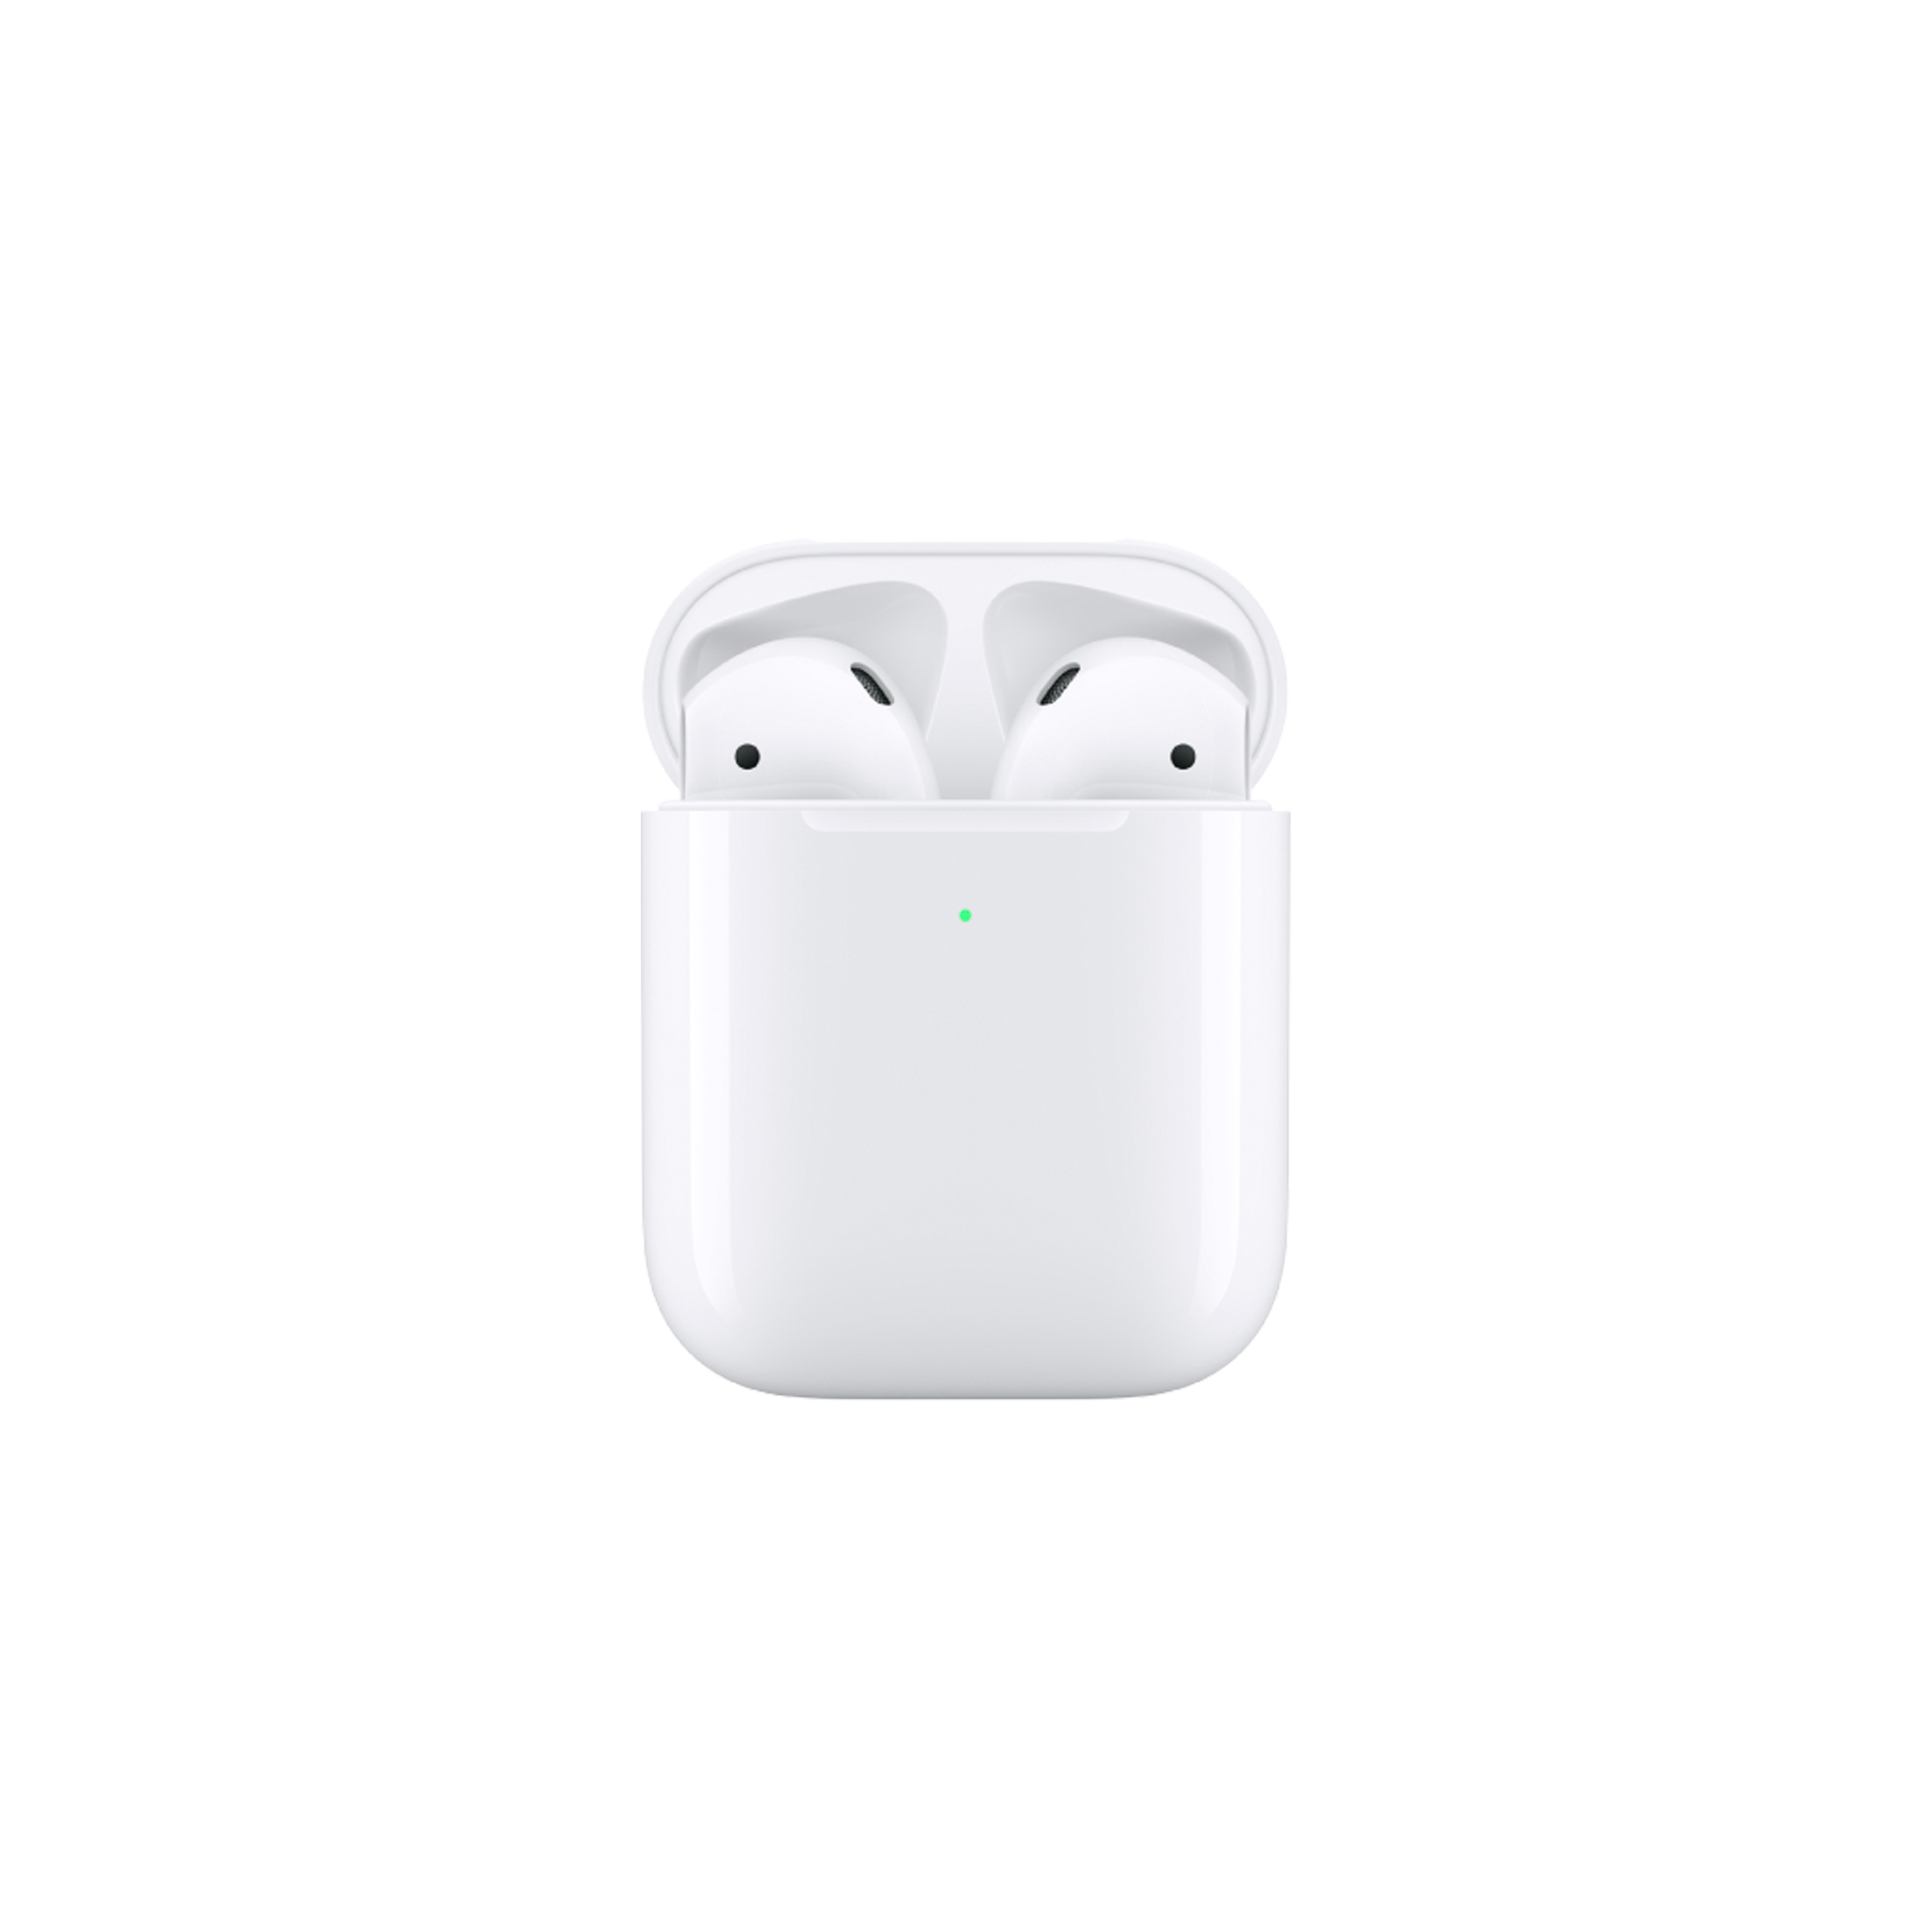 Apple Airpods 2. generation